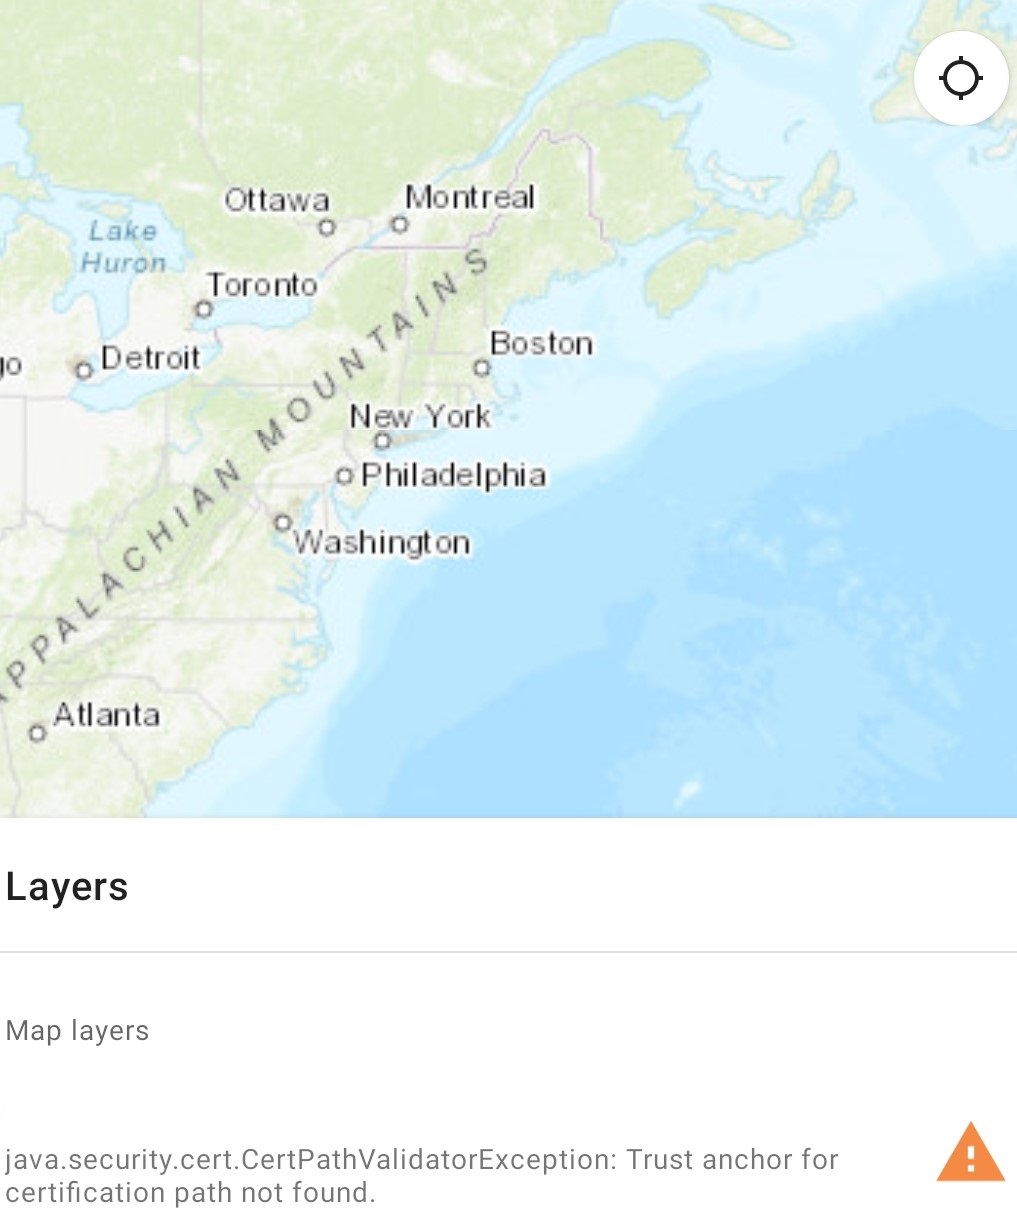 The error in ArcGIS Collector (Android) when viewing a layer with a triangular warning